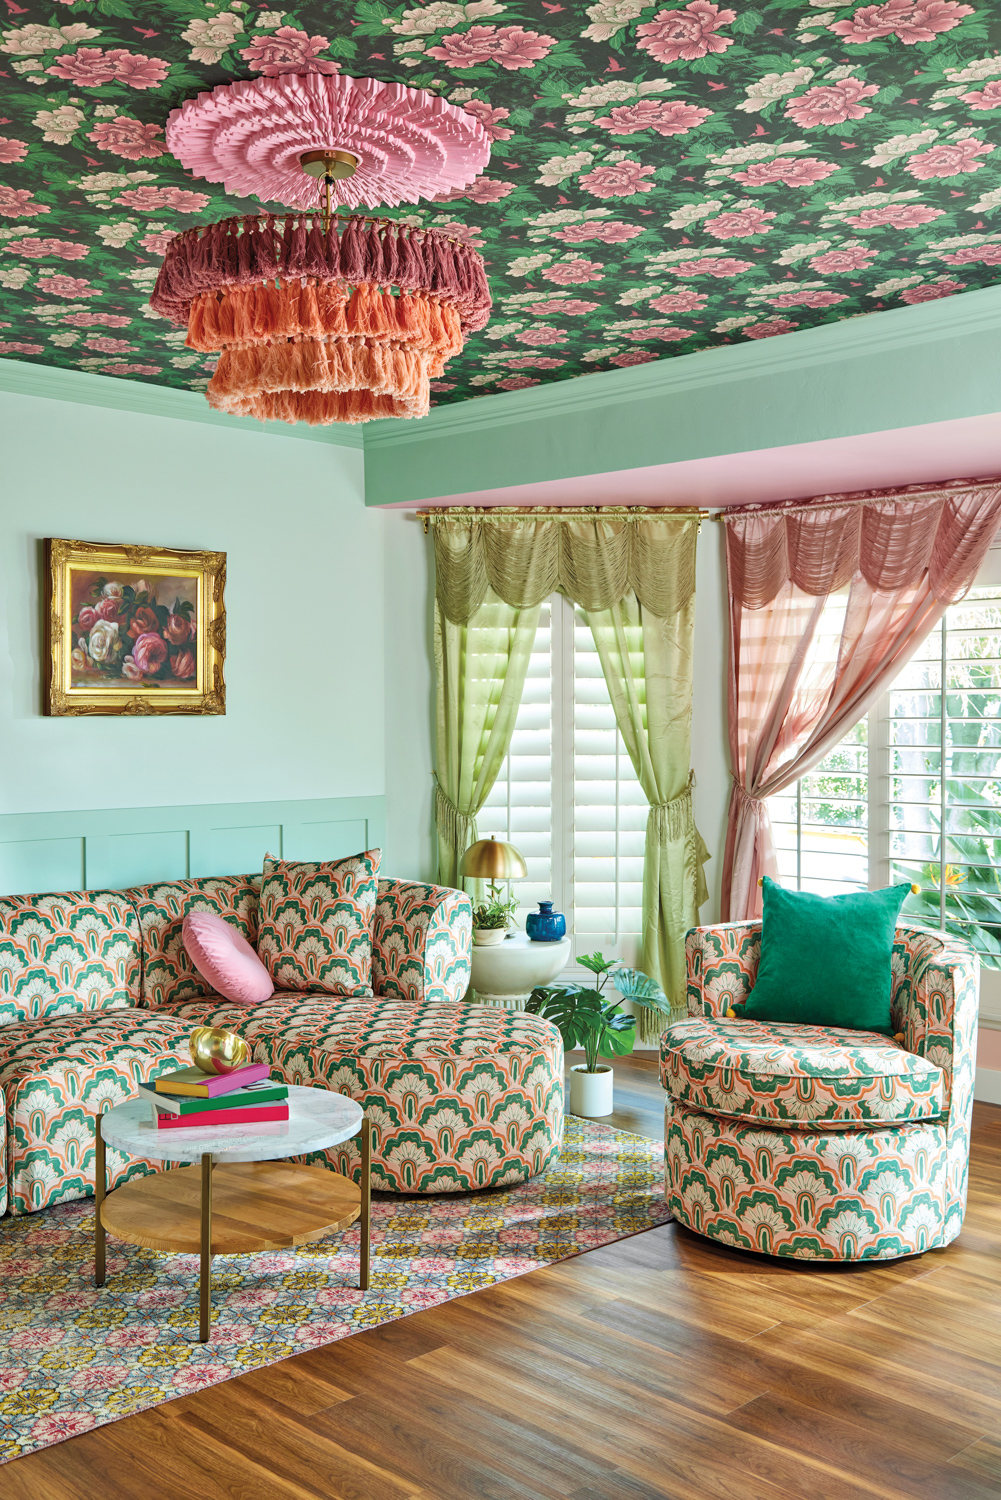 Living room with mint walls, pattered furniture, fringed orange chandelier and pink and green drapes